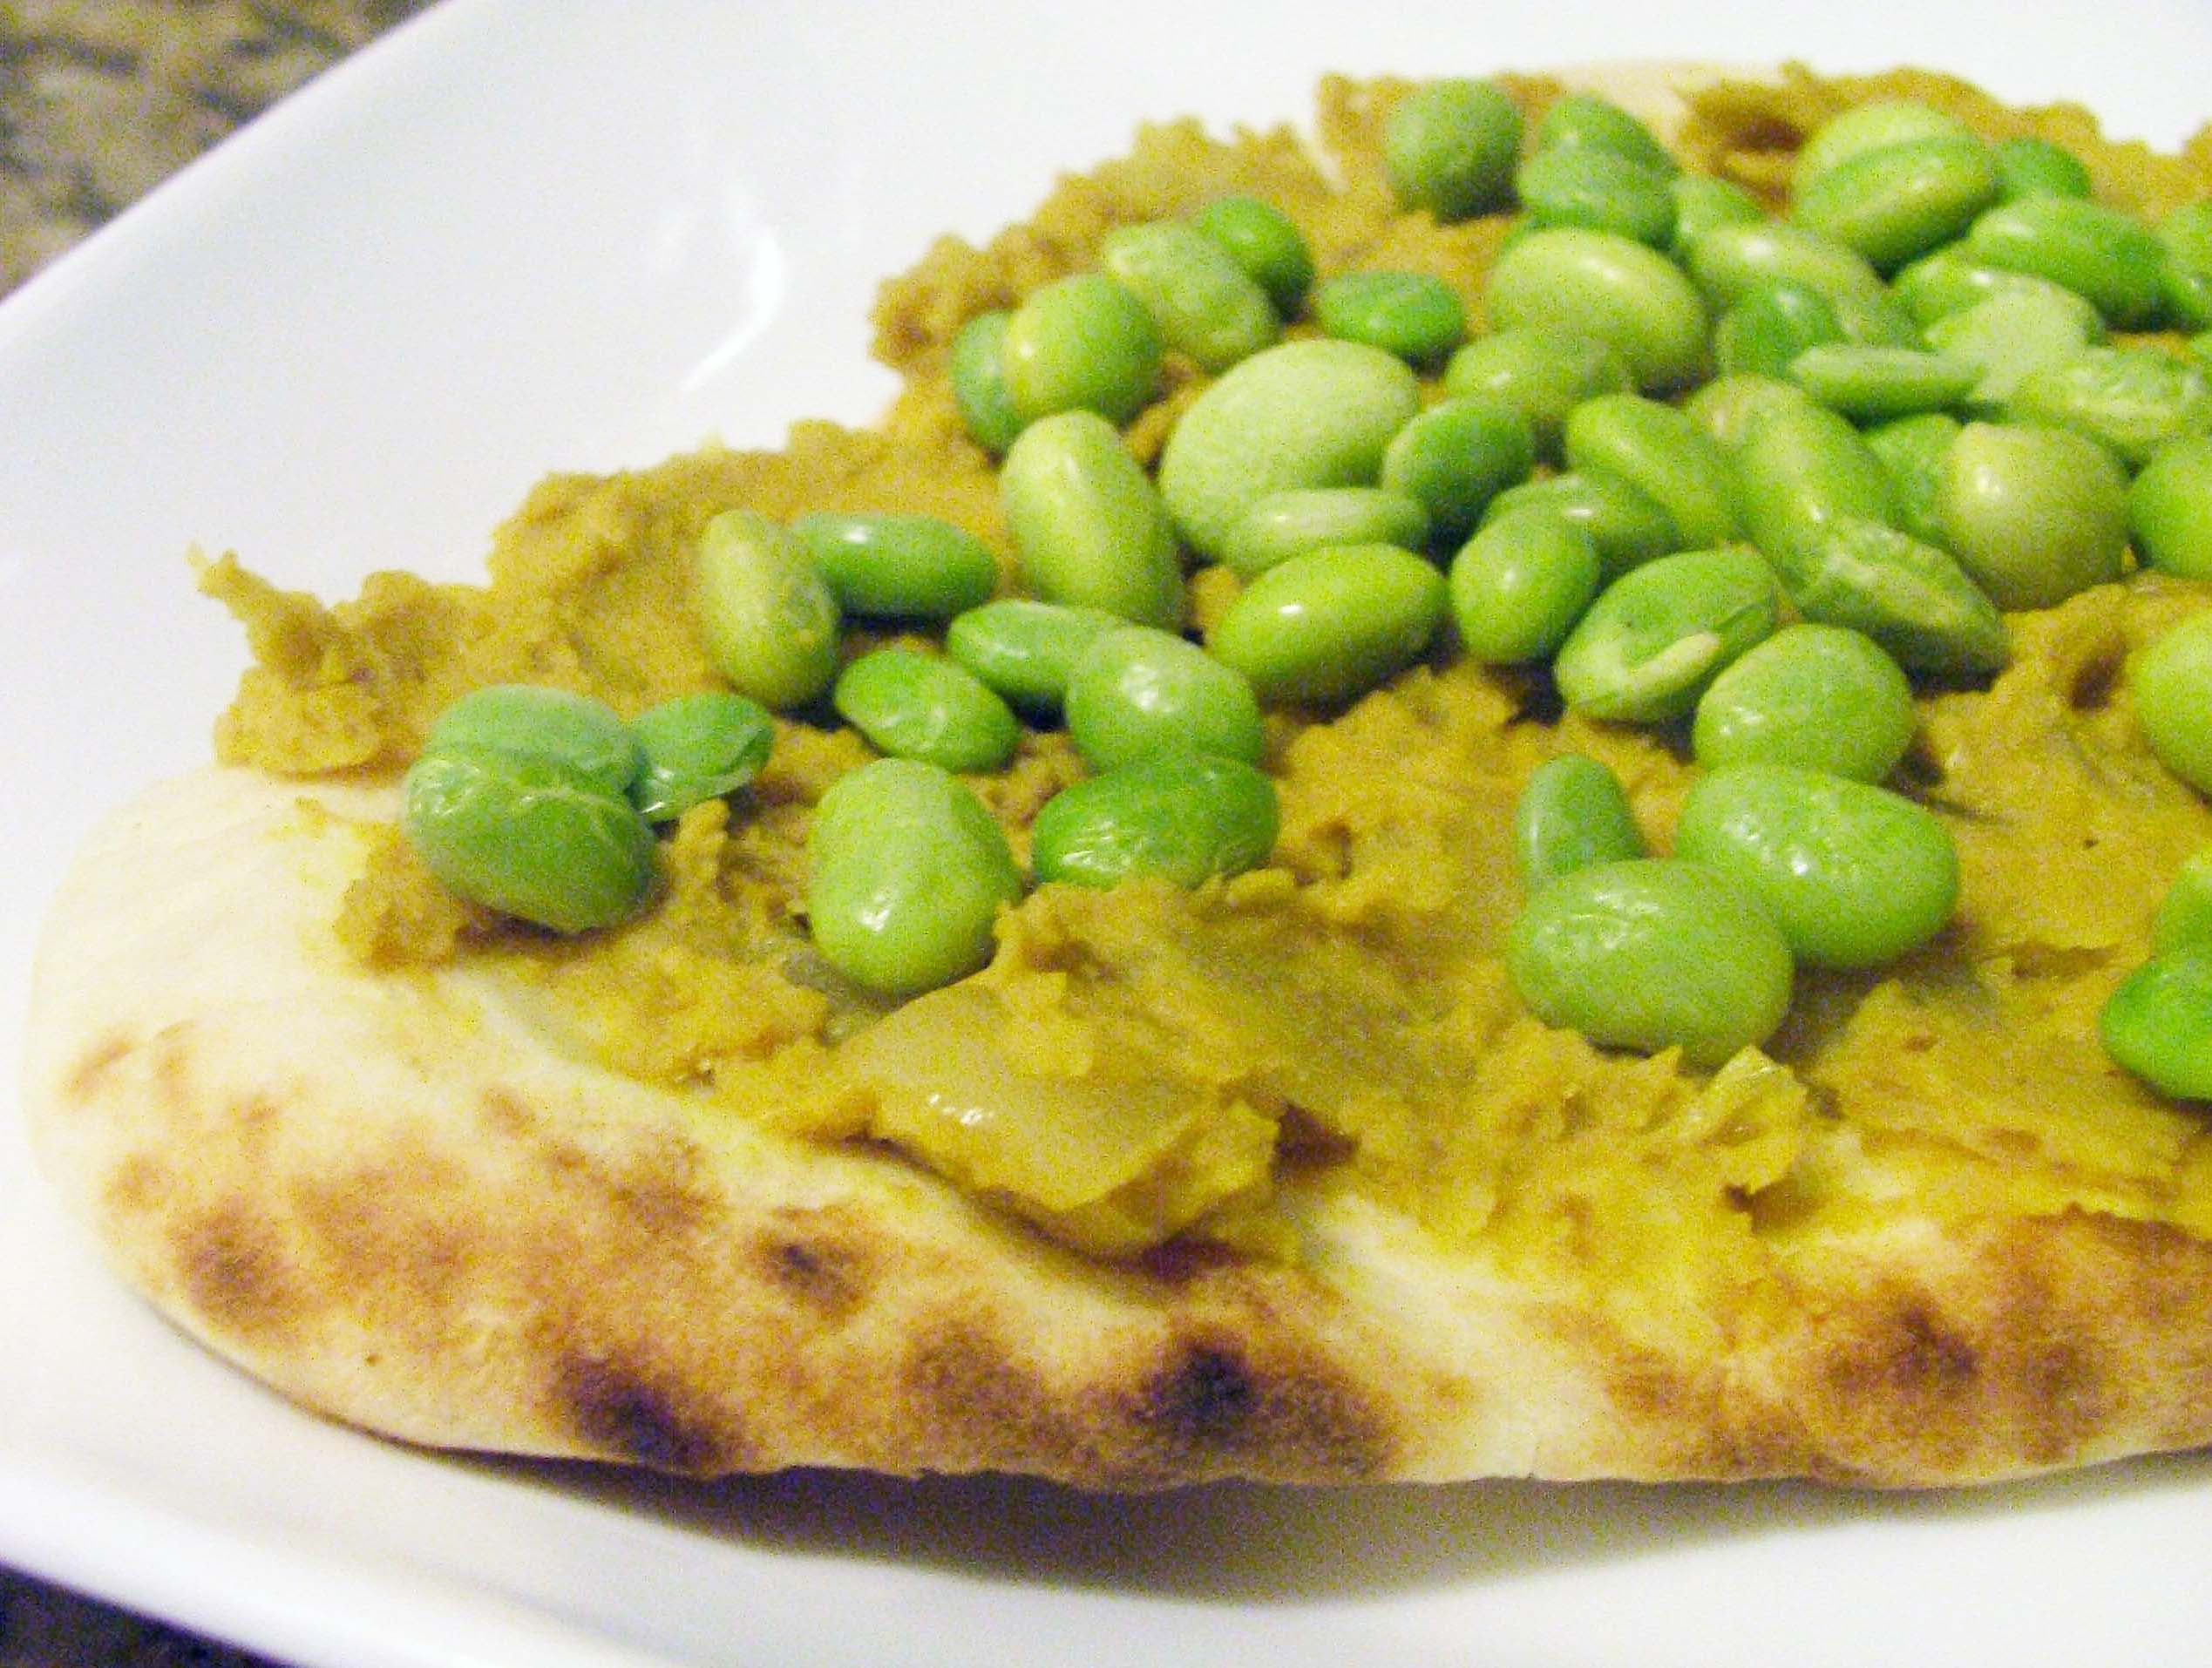 Naan Flatbread with Curried Chickpeas and Edamame